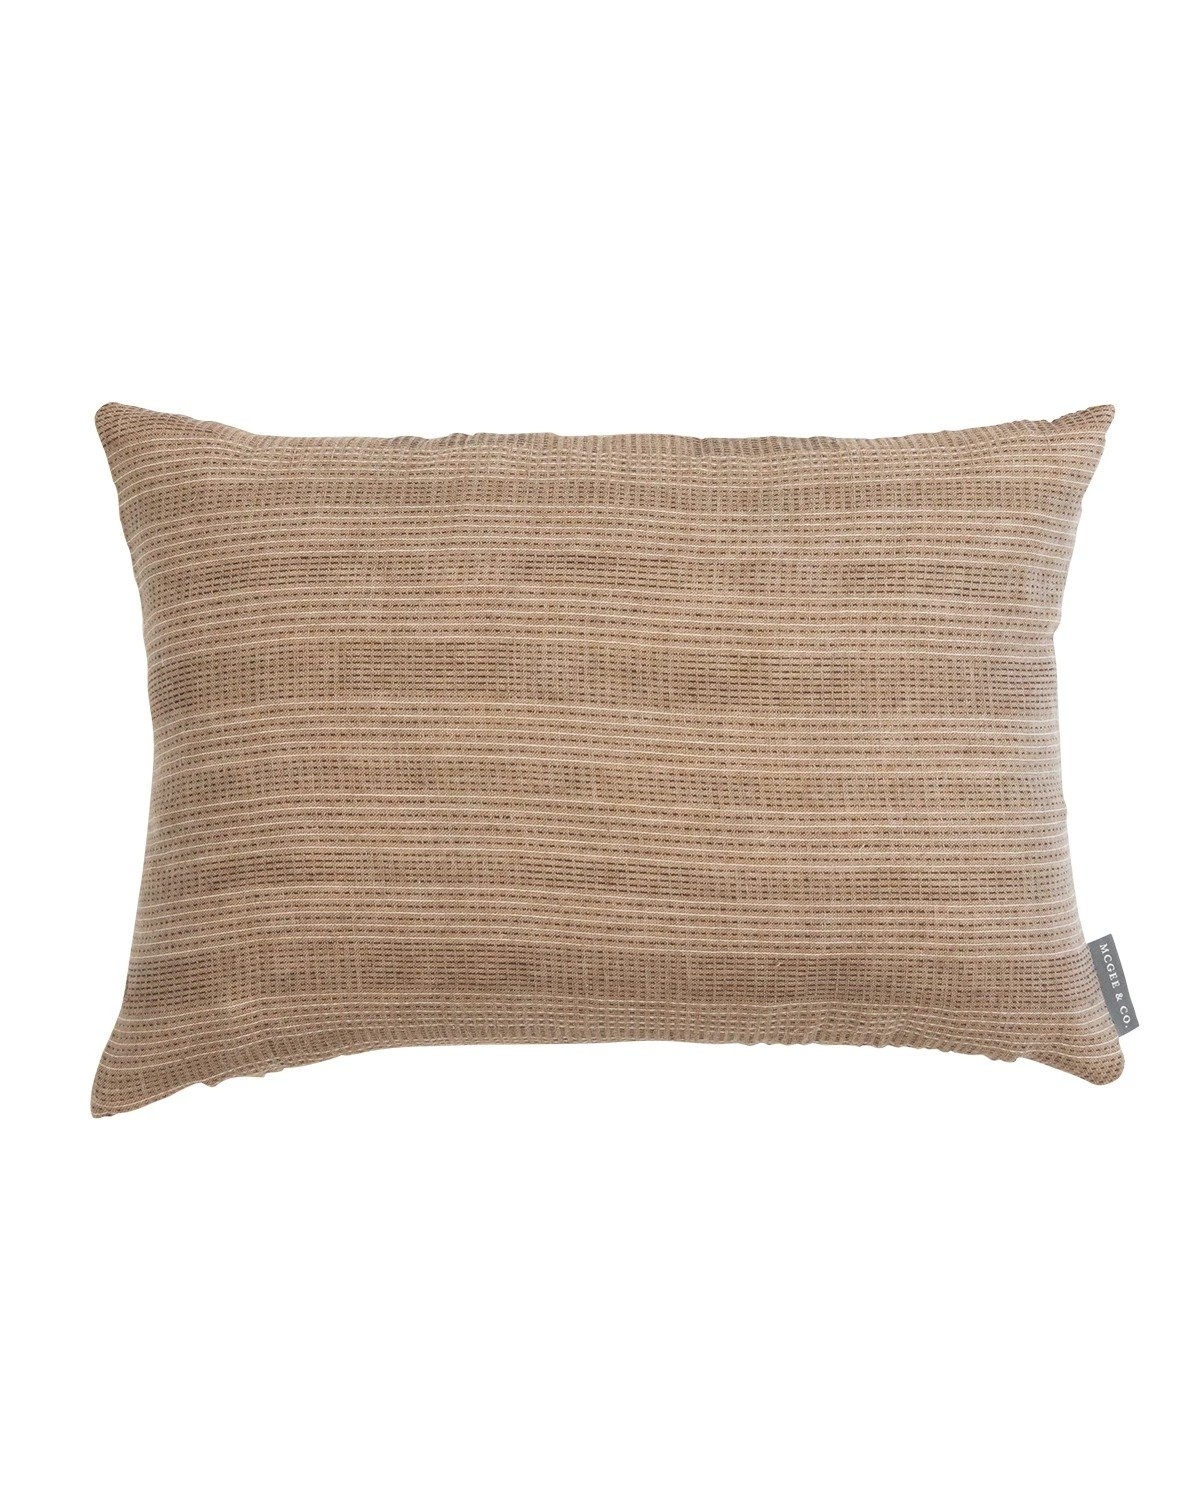 CASSIA VINTAGE NO. 2 PILLOW WITHOUT INSERT - 14" x 20" - Image 0